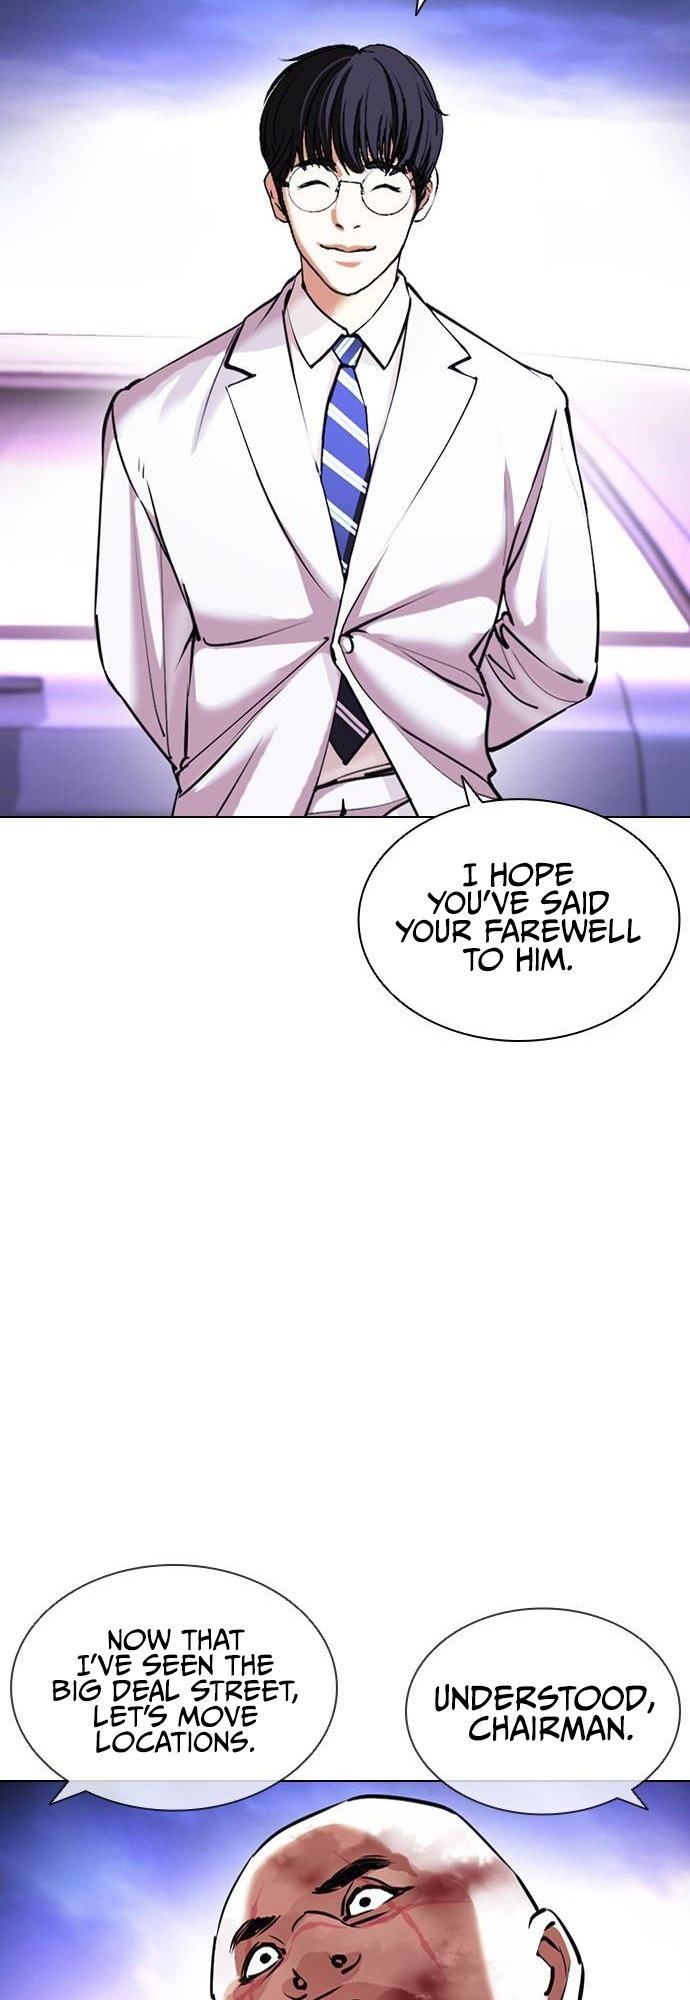 Lookism Chapter 415 image 029